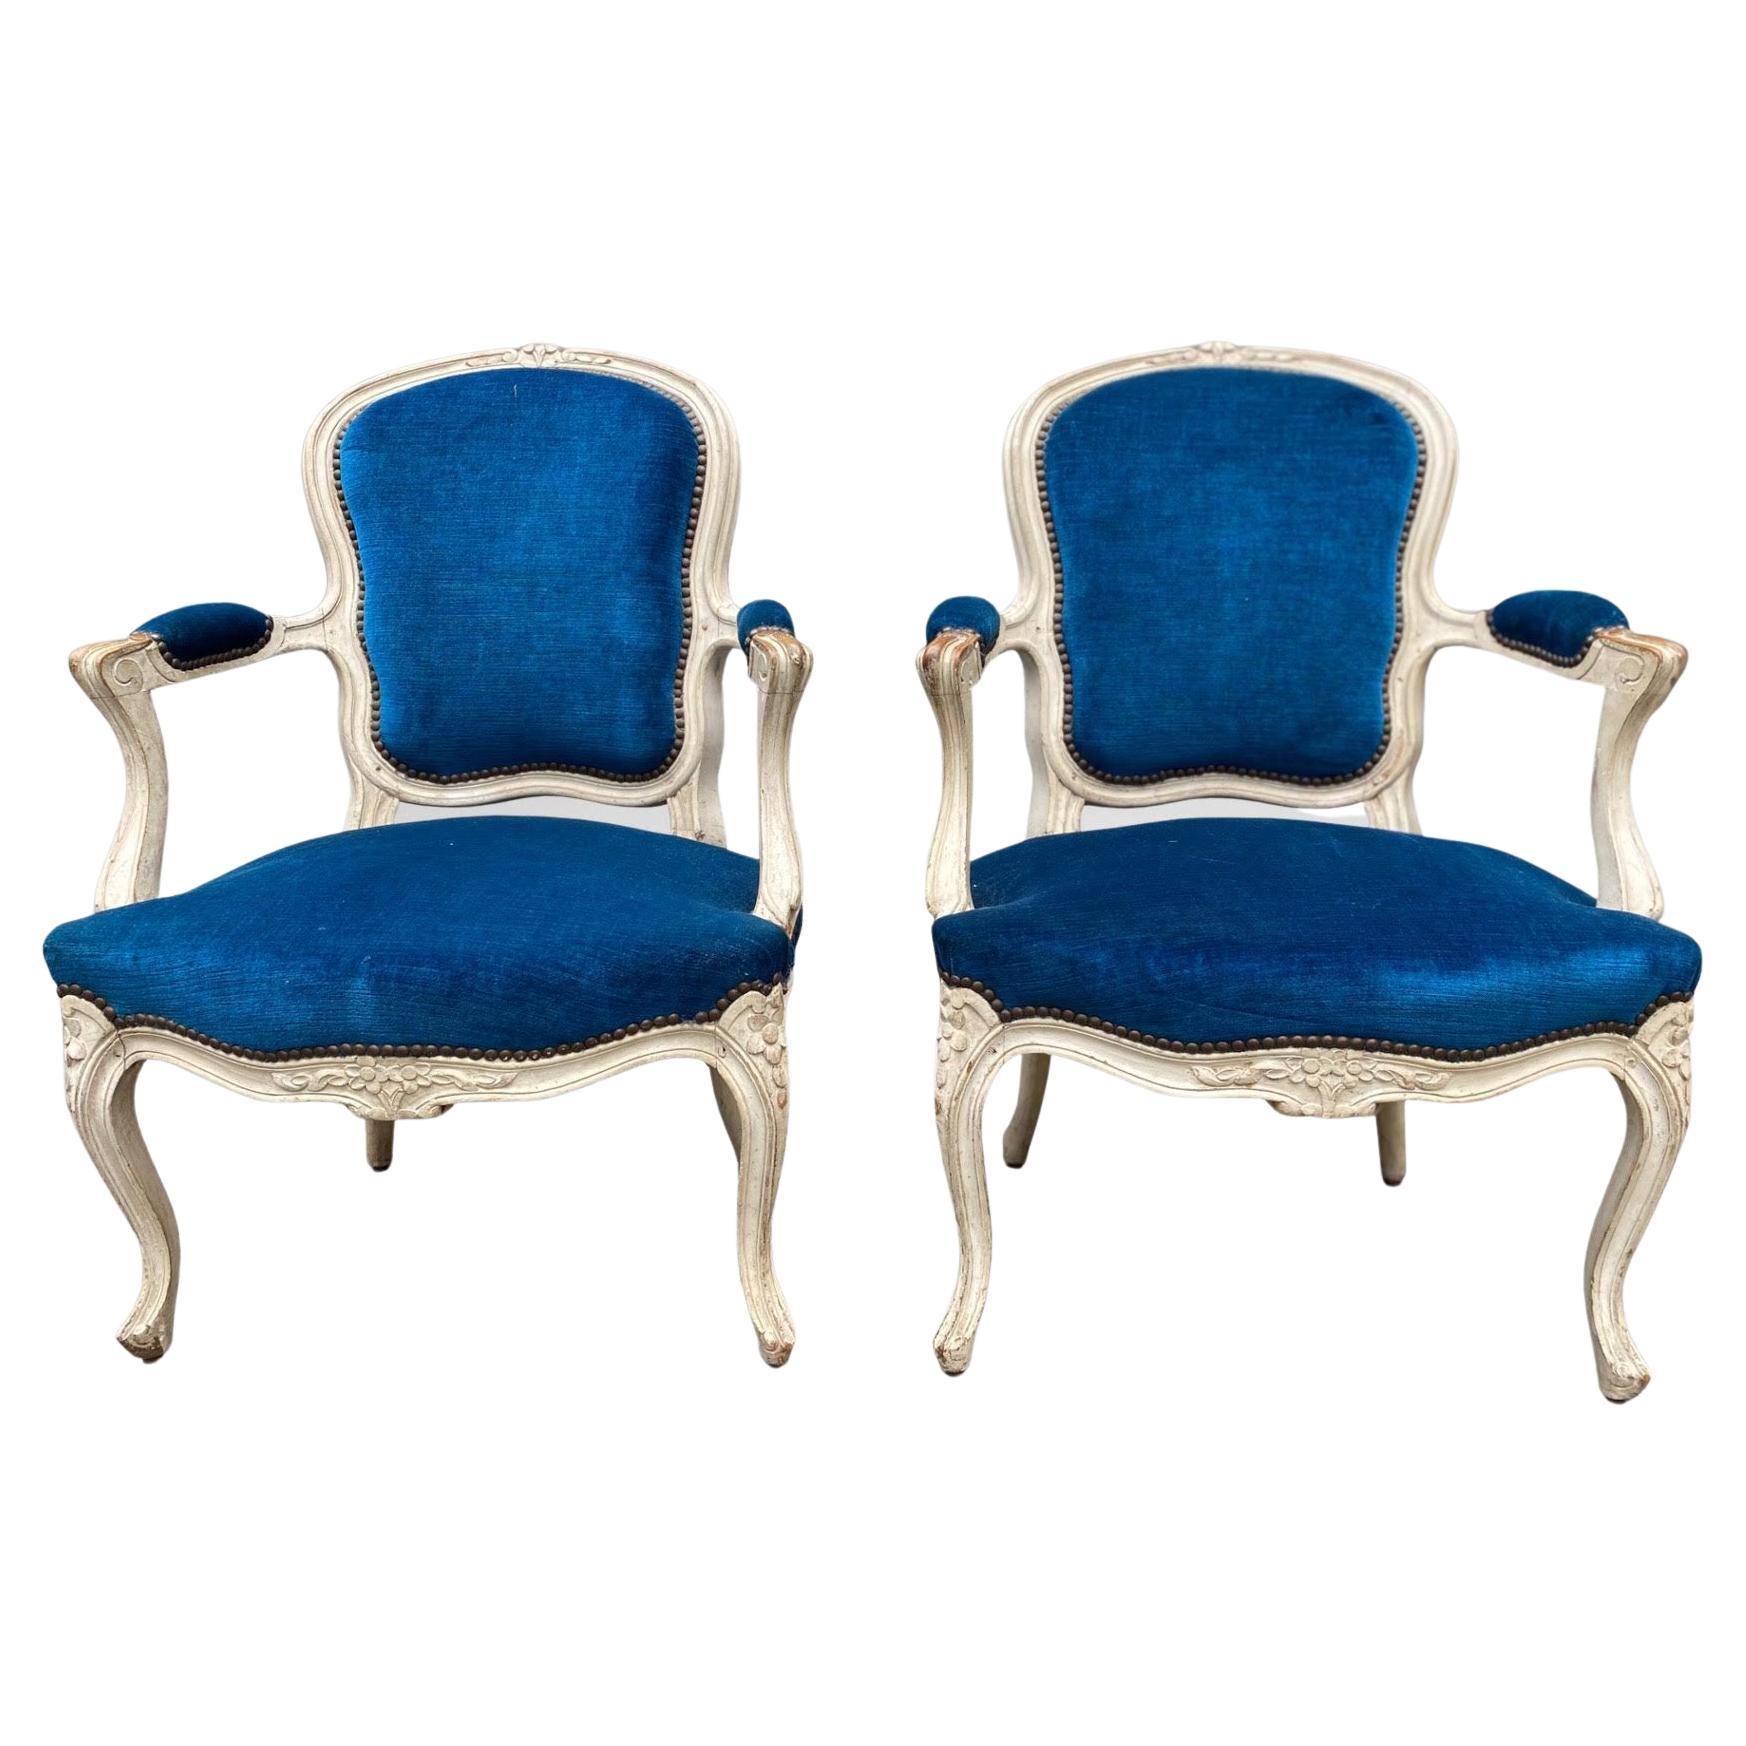 Pair of 19th Century French Bergères Armchairs